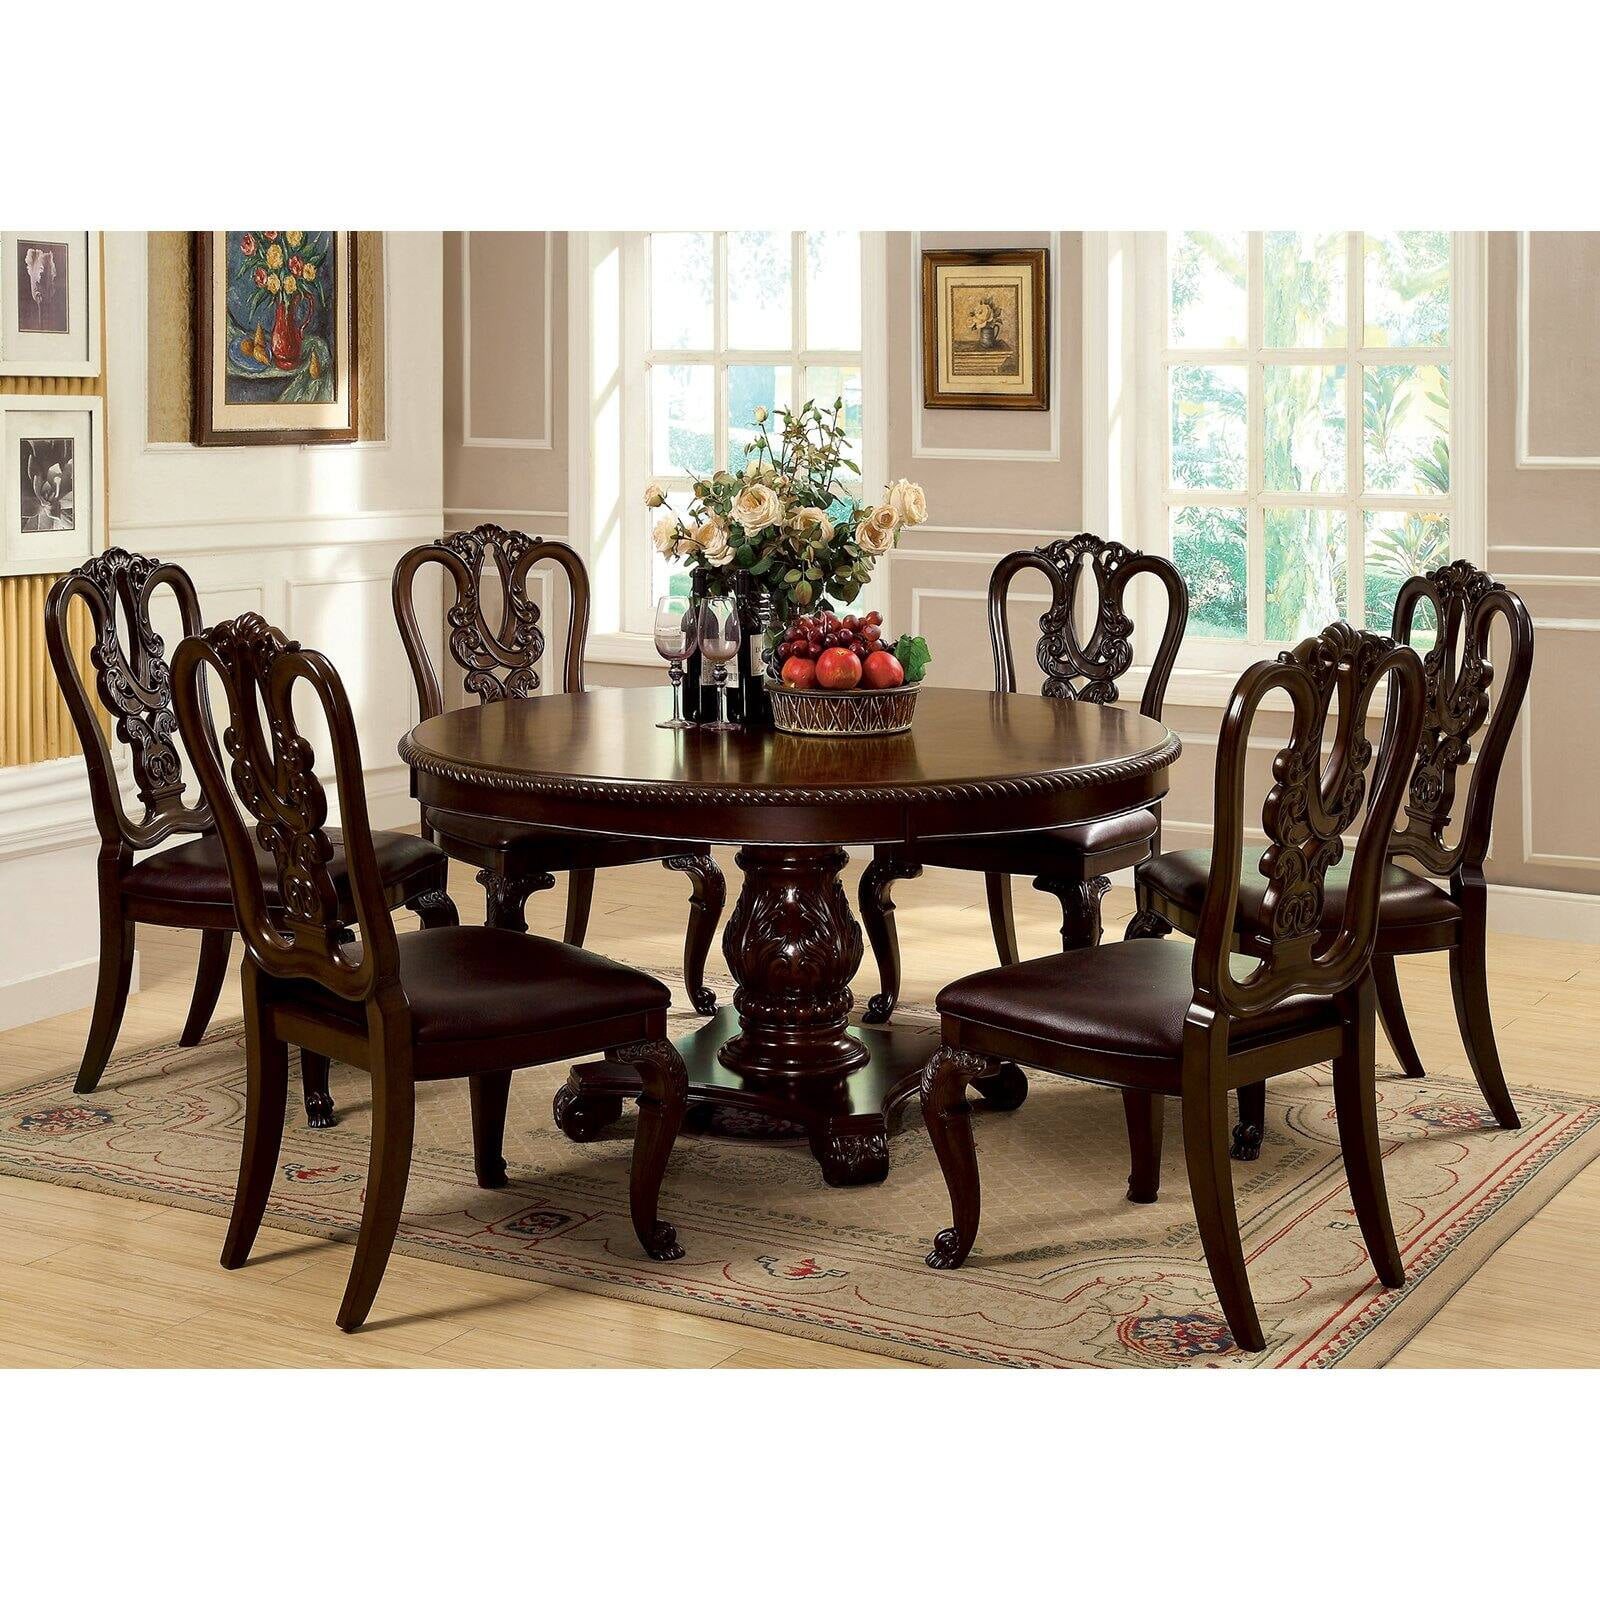 Furniture of America Berkshire 7-Piece Round Dining Set with Wooden